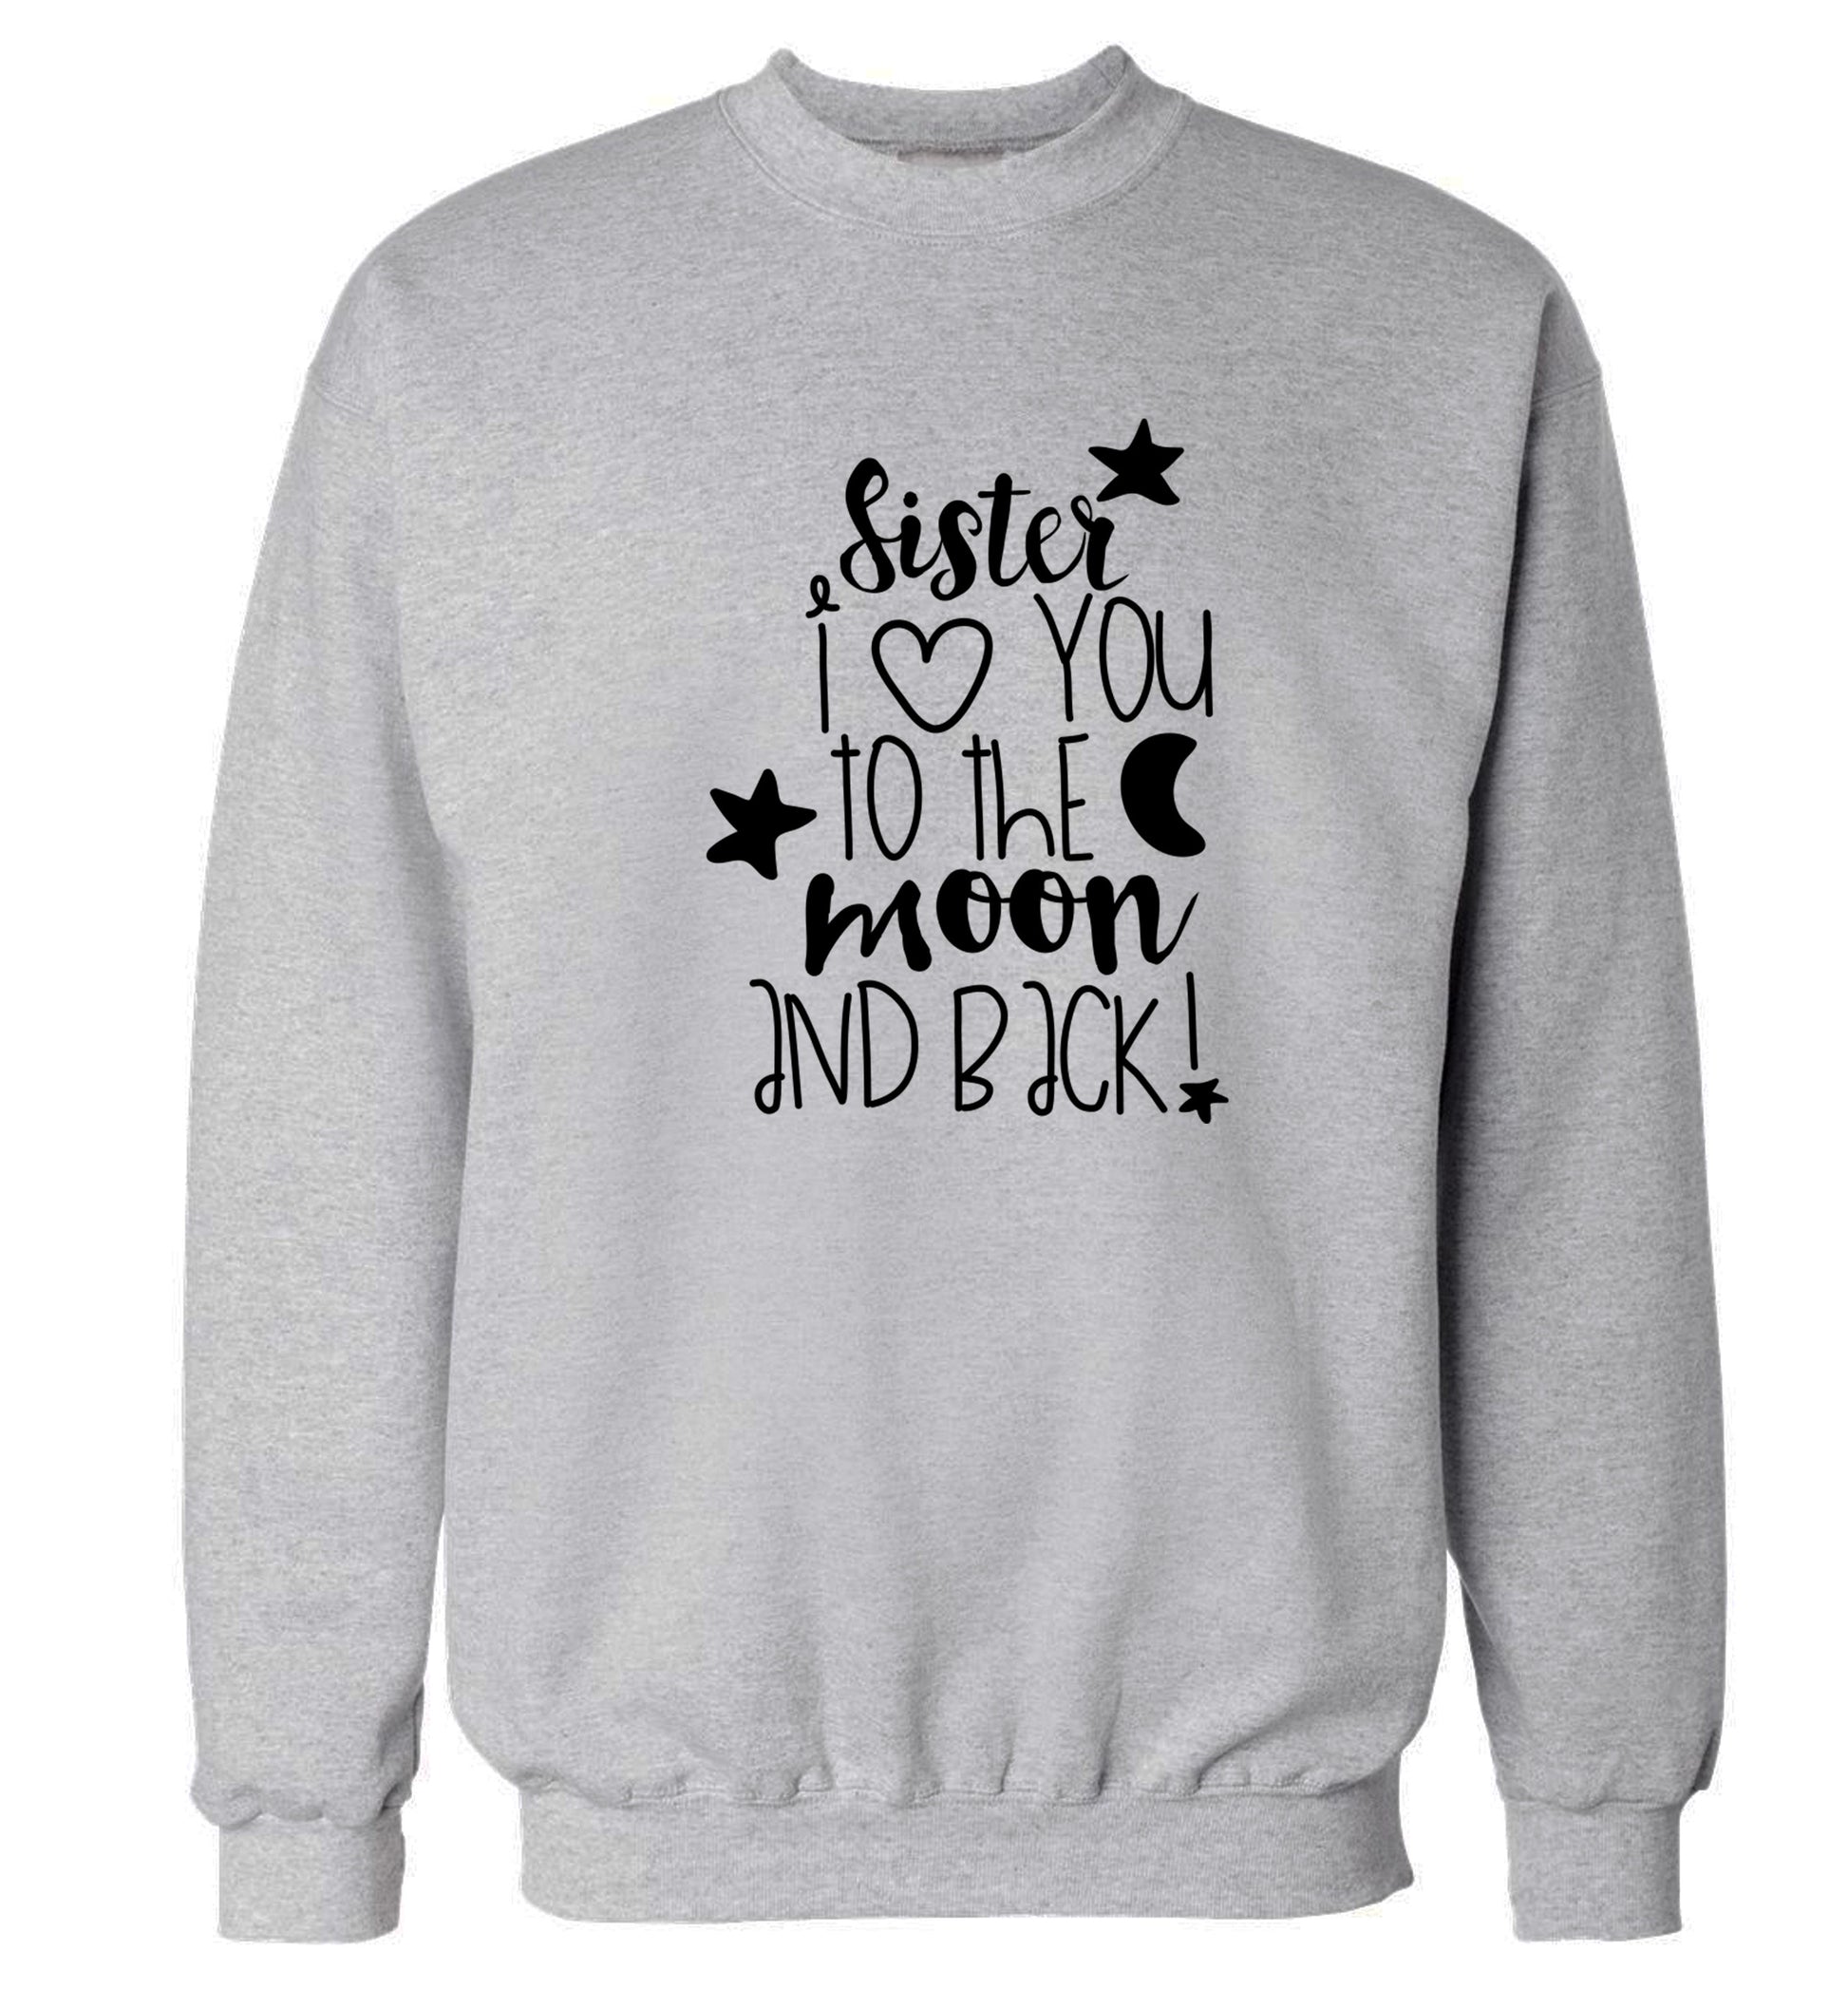 Sister I love you to the moon and back Adult's unisex grey  sweater 2XL